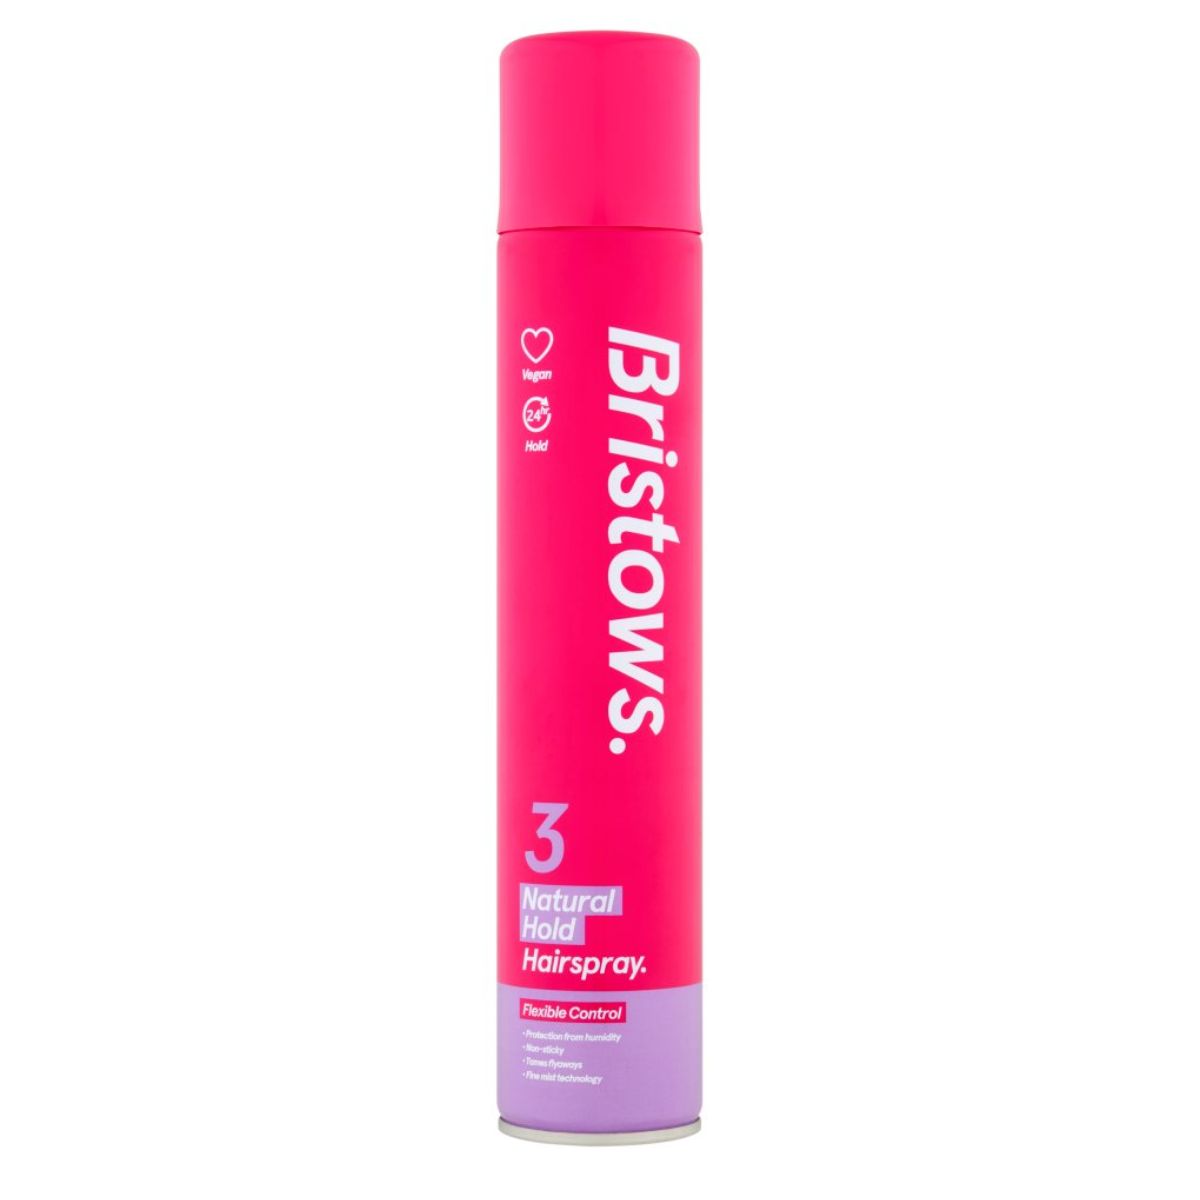 A pink bottle of Bristows - 3 Natural Hold Hairspray - 400ml on a white background.